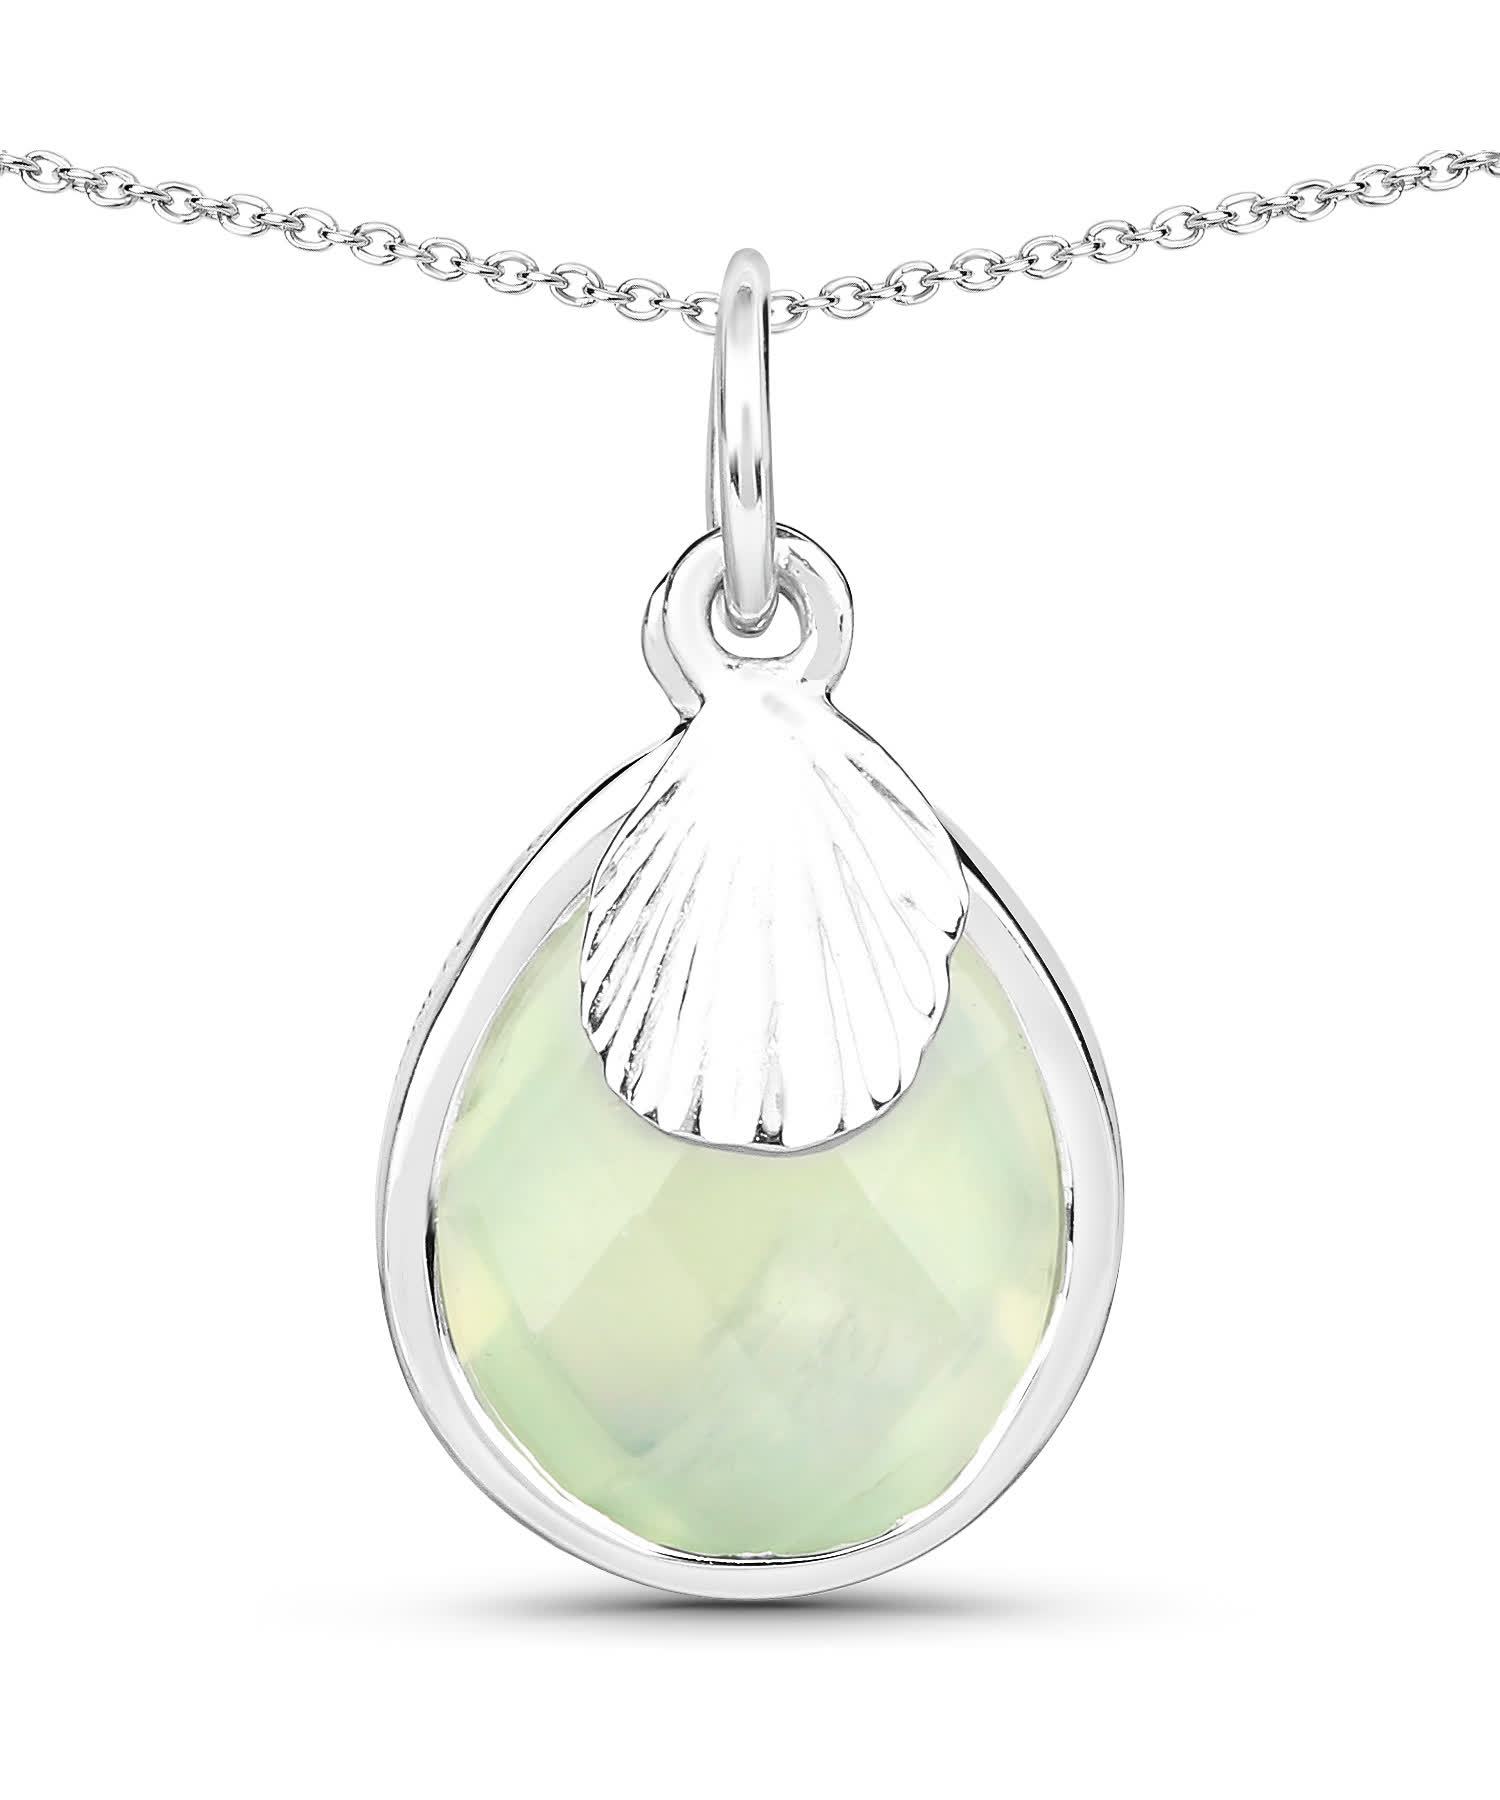 3.78ctw Natural Prehnite Rhodium Plated 925 Sterling Silver Drop Pendant With Chain View 1